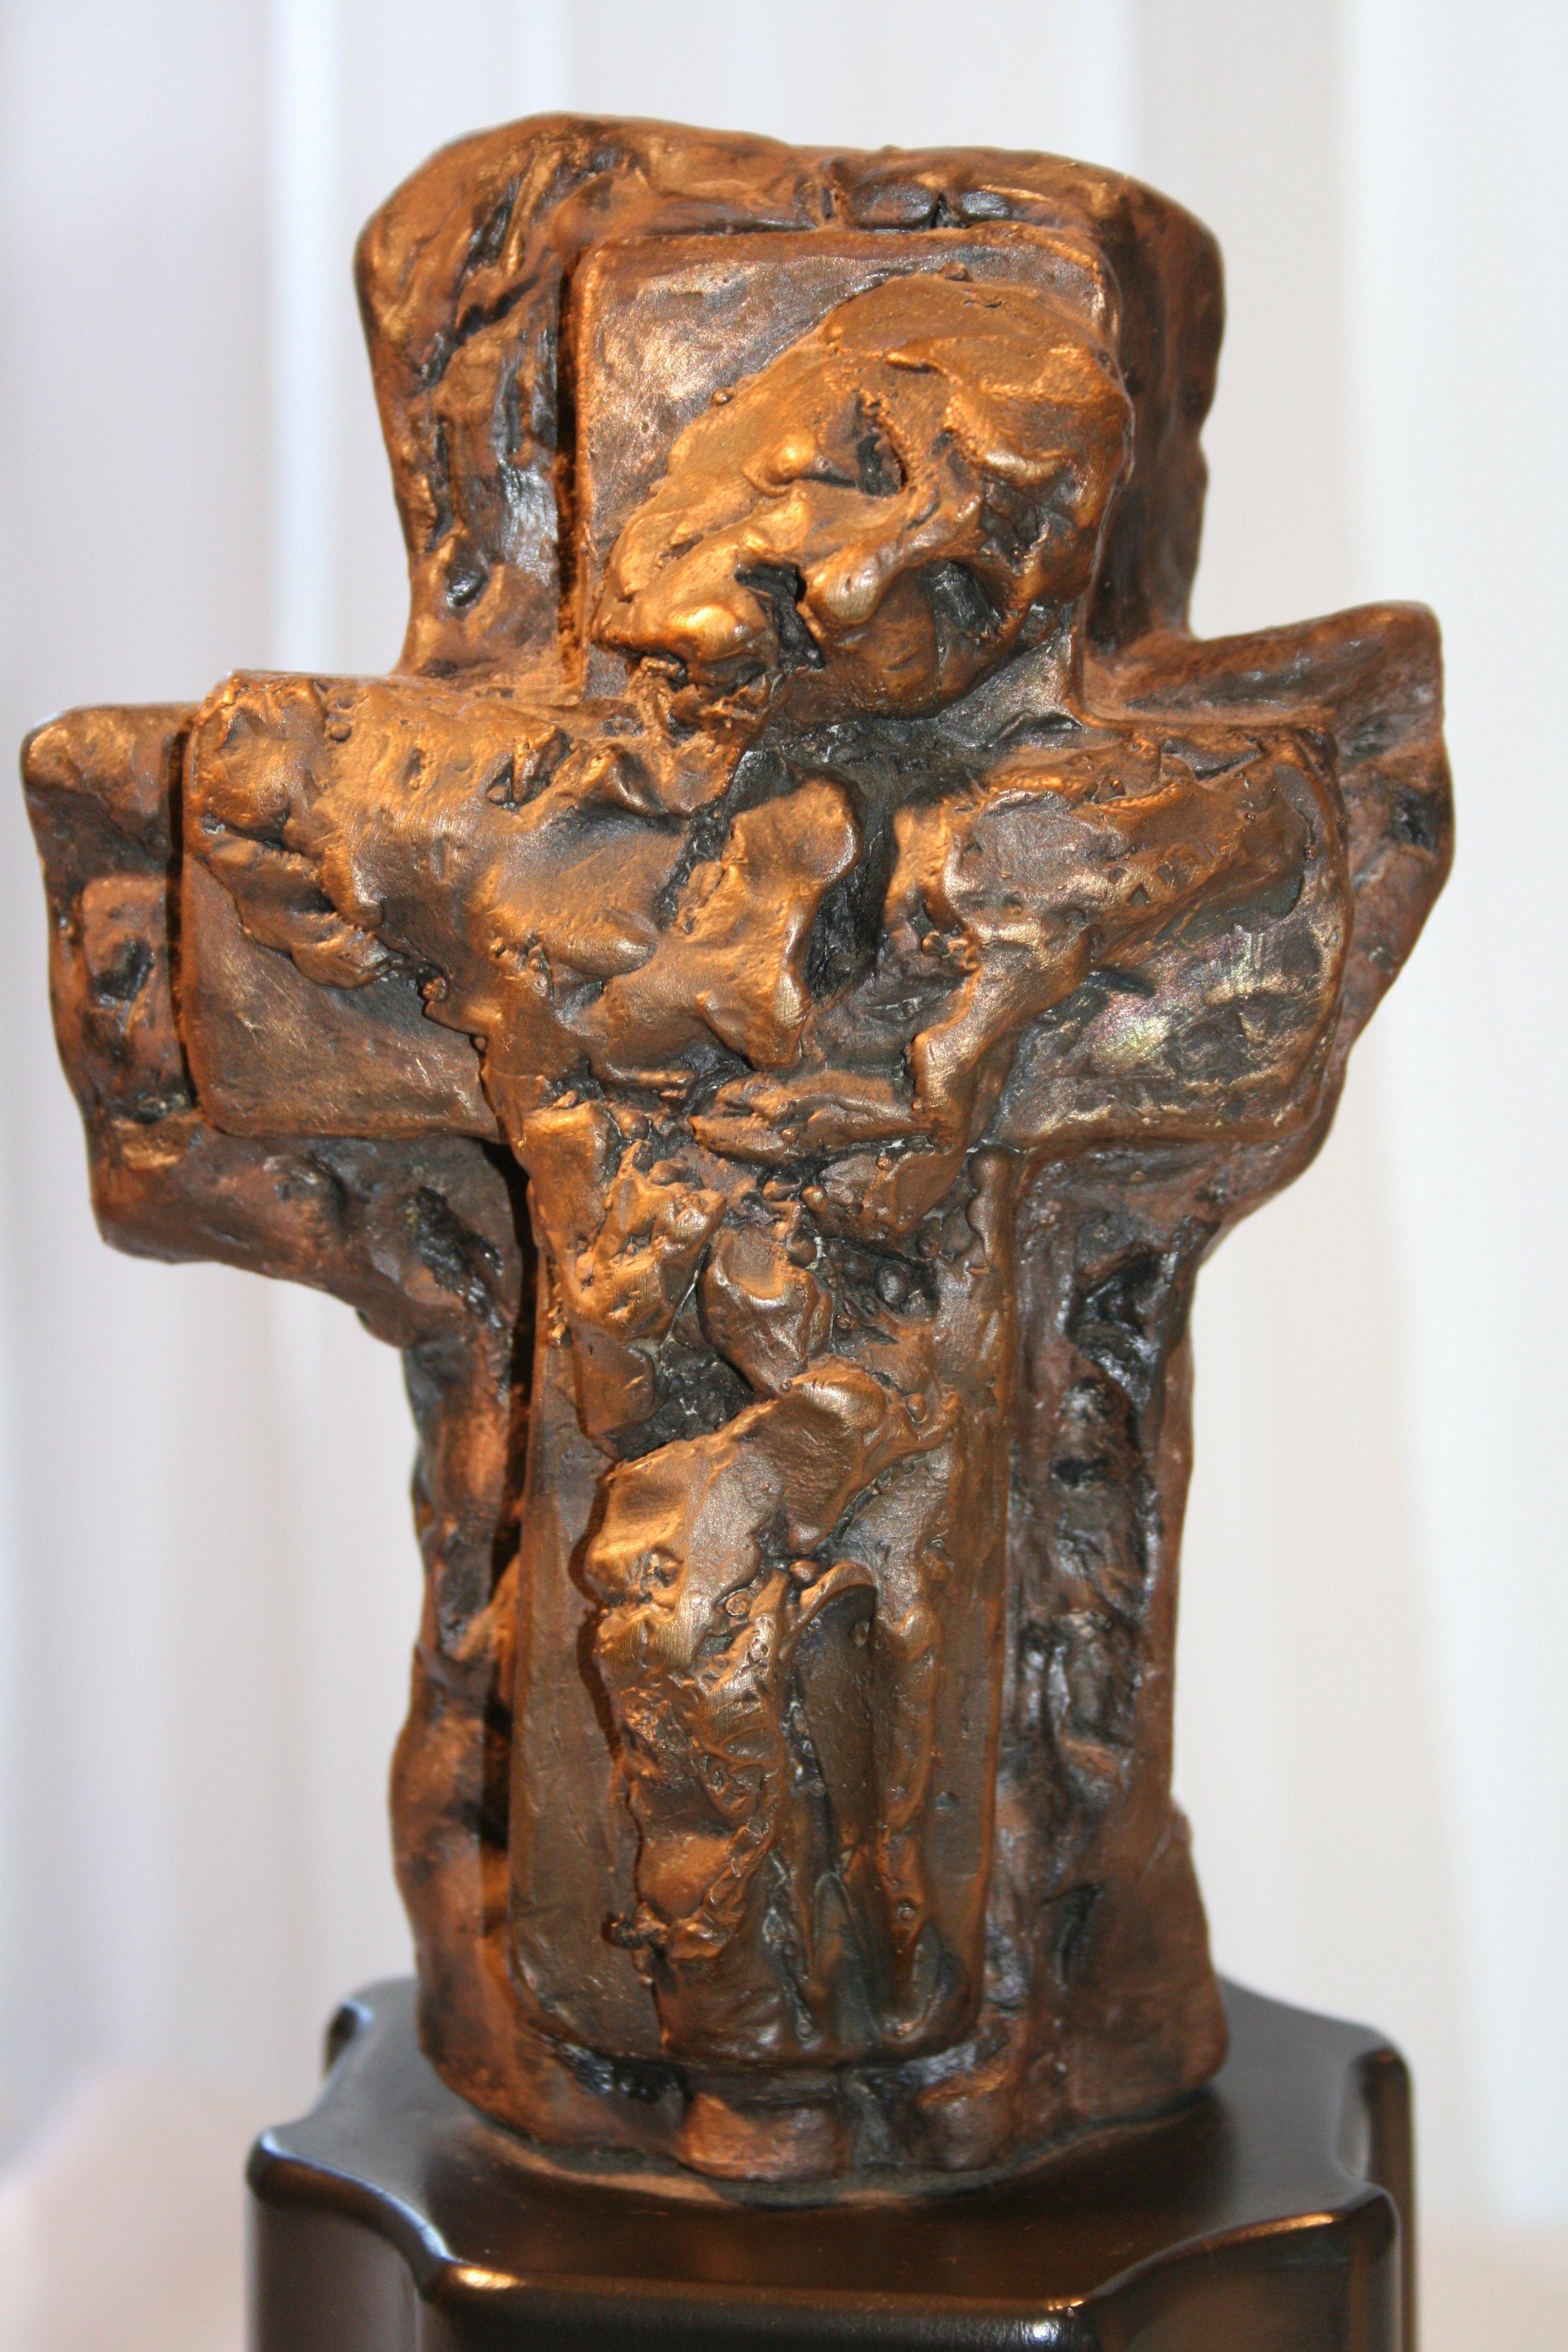 "Radical Crucifix" by Susana Youngsteadt